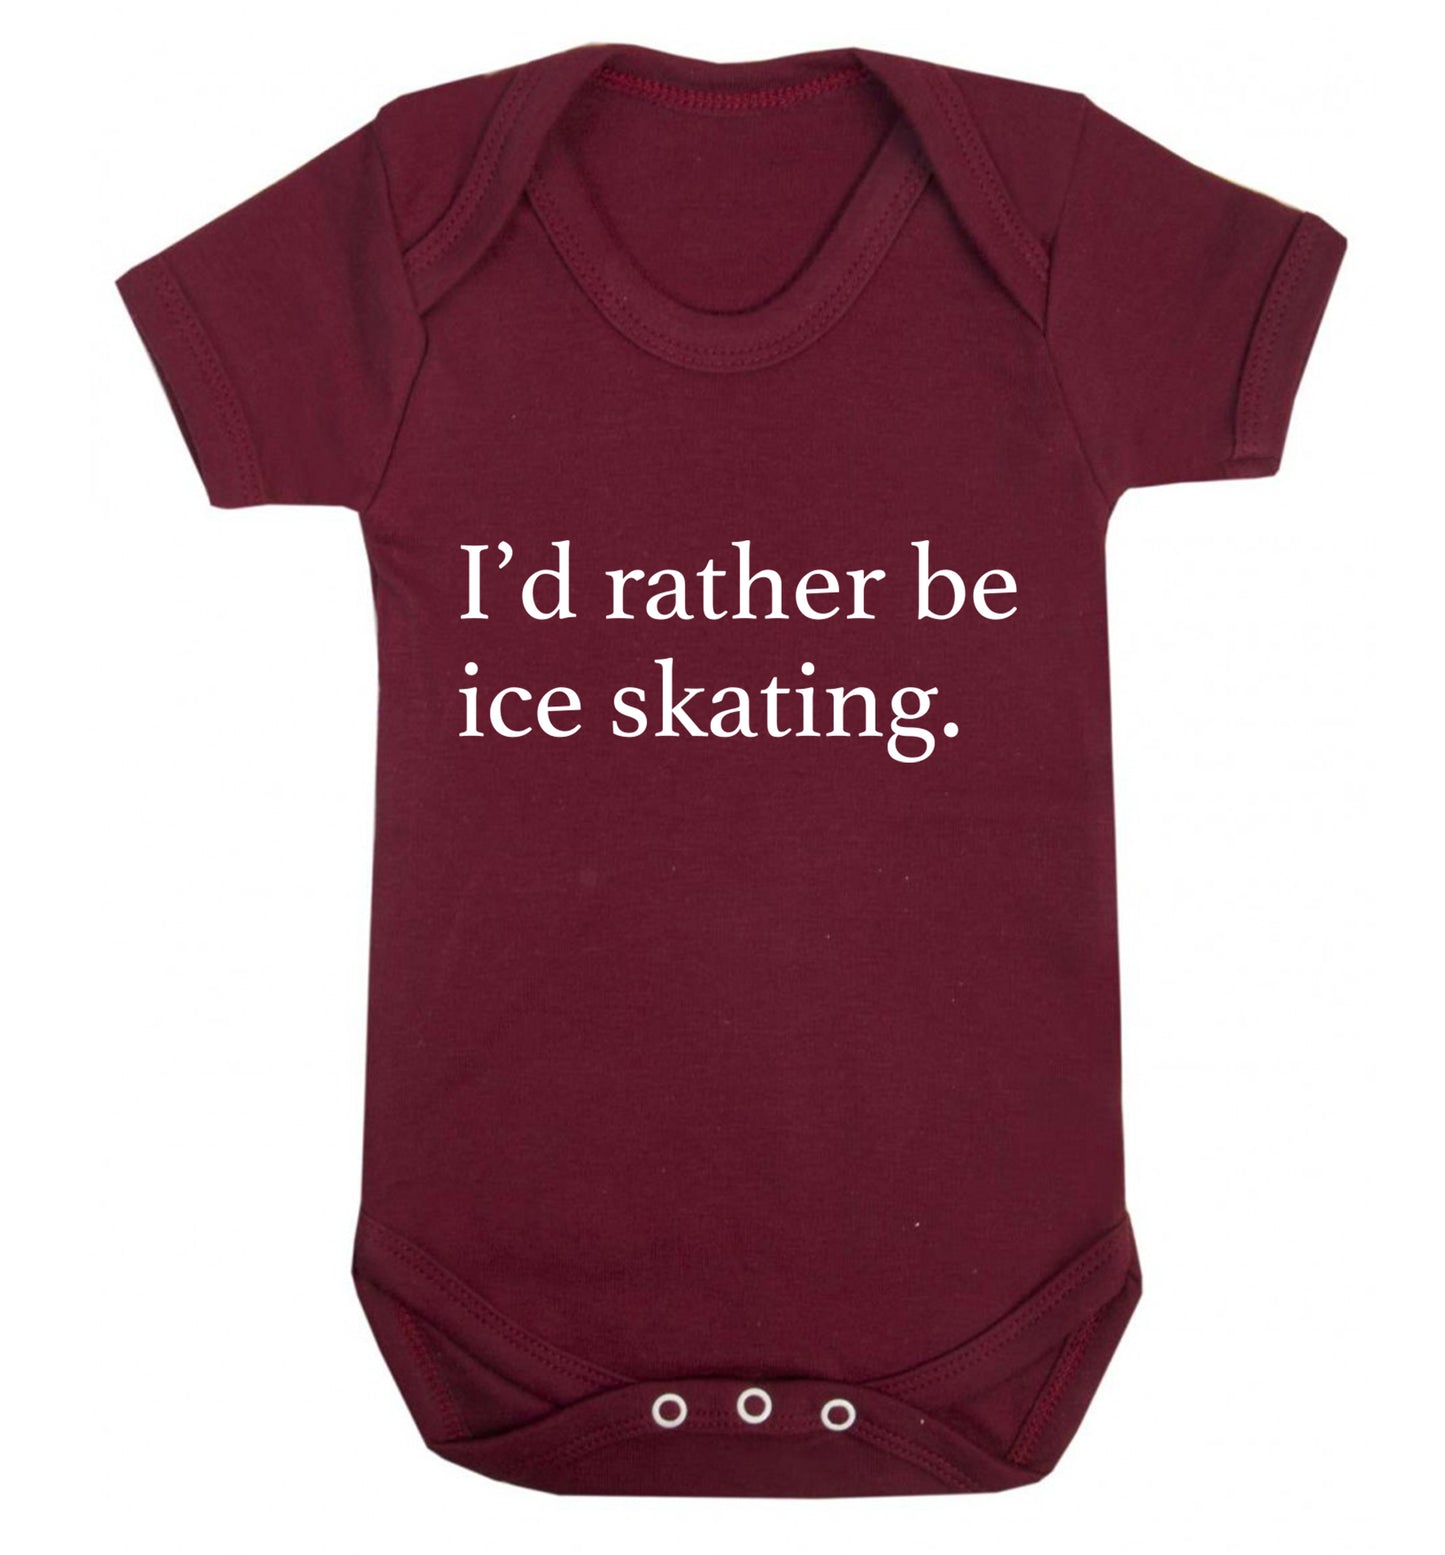 I'd rather be ice skating Baby Vest maroon 18-24 months